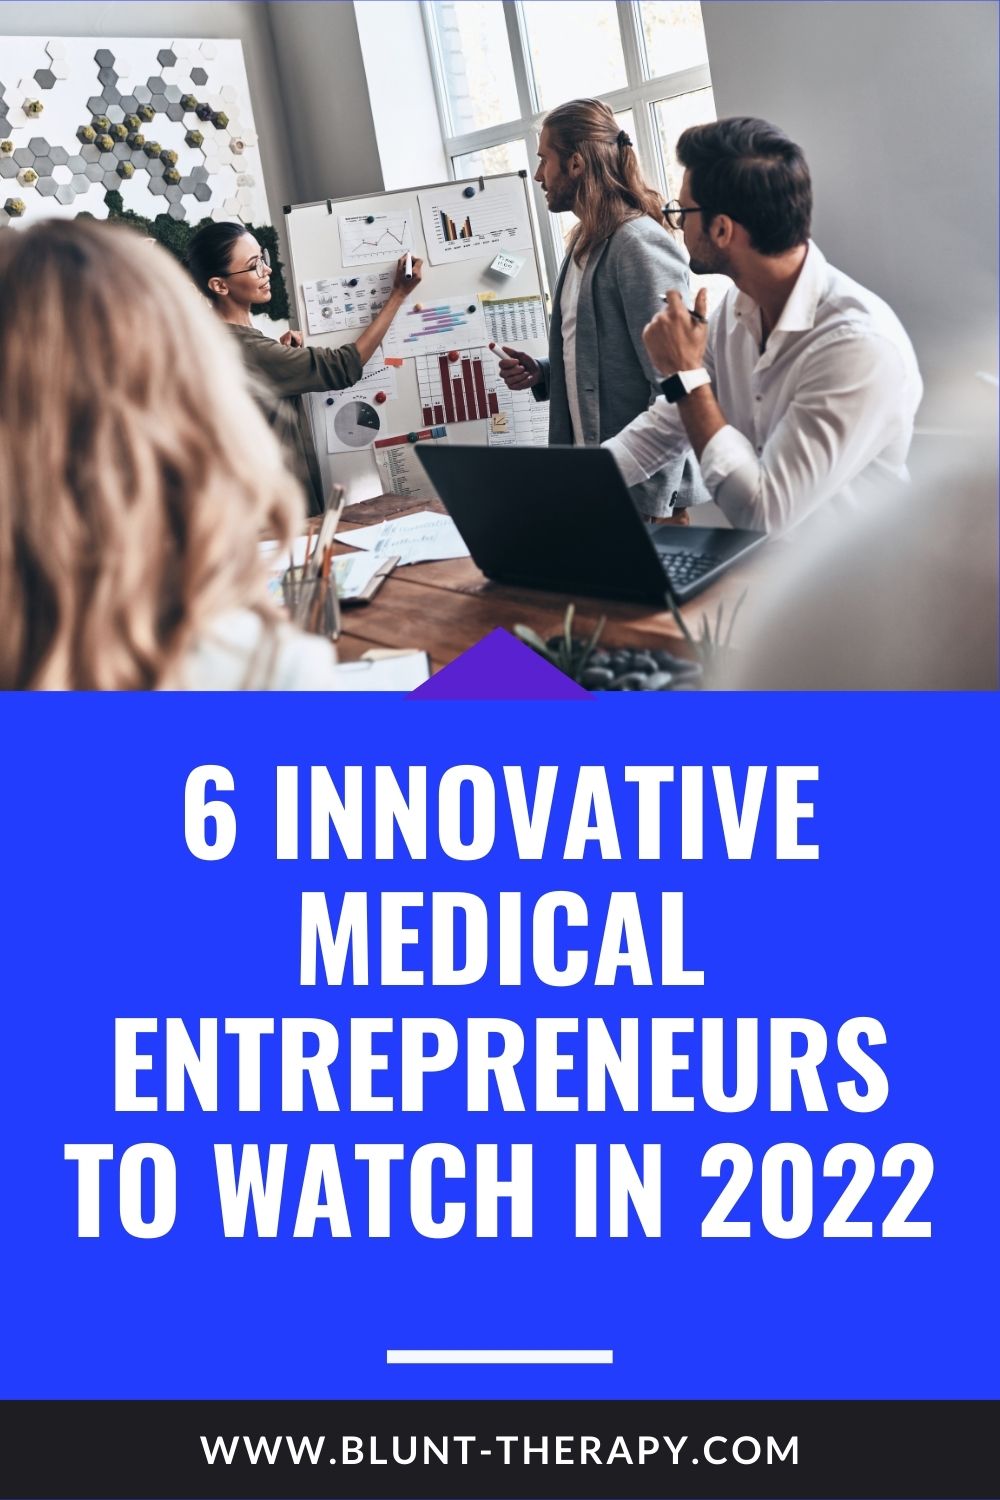 6 Innovative Medical Entrepreneurs to Watch in 2022